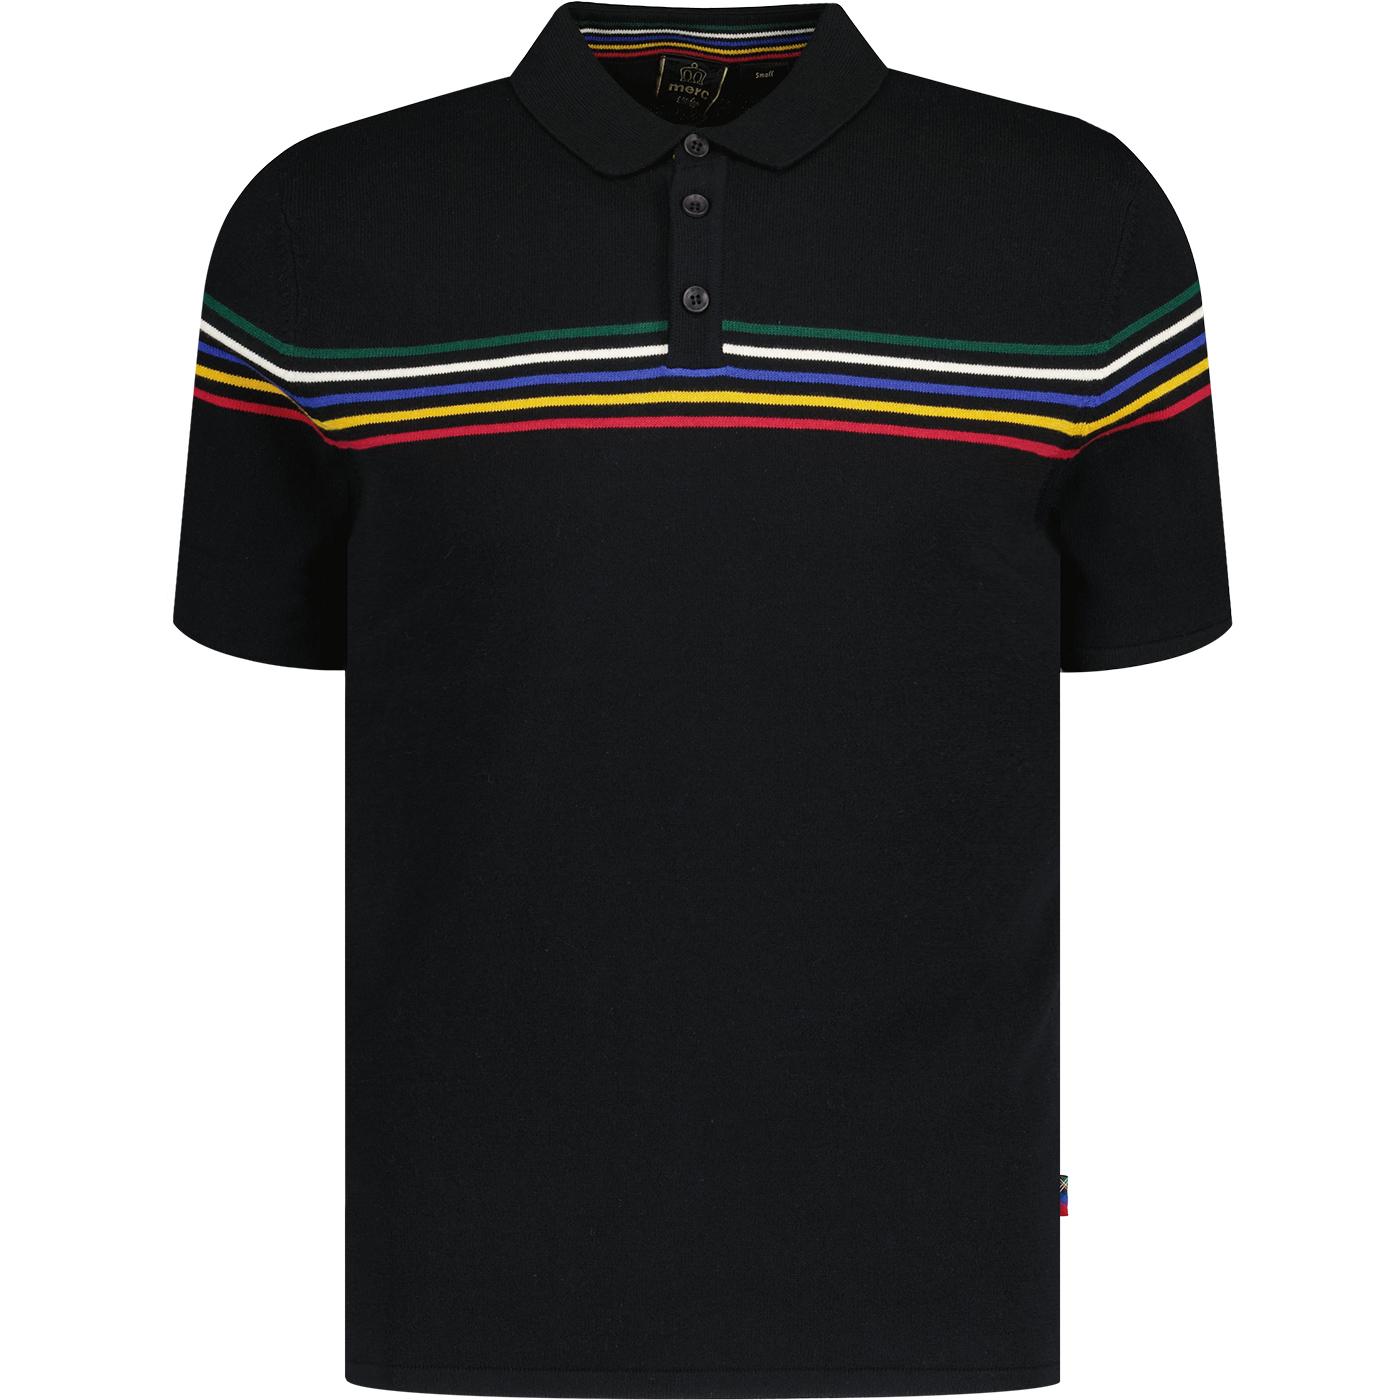 Hickory MERC Retro Mod Knitted Polo Shirt in Black